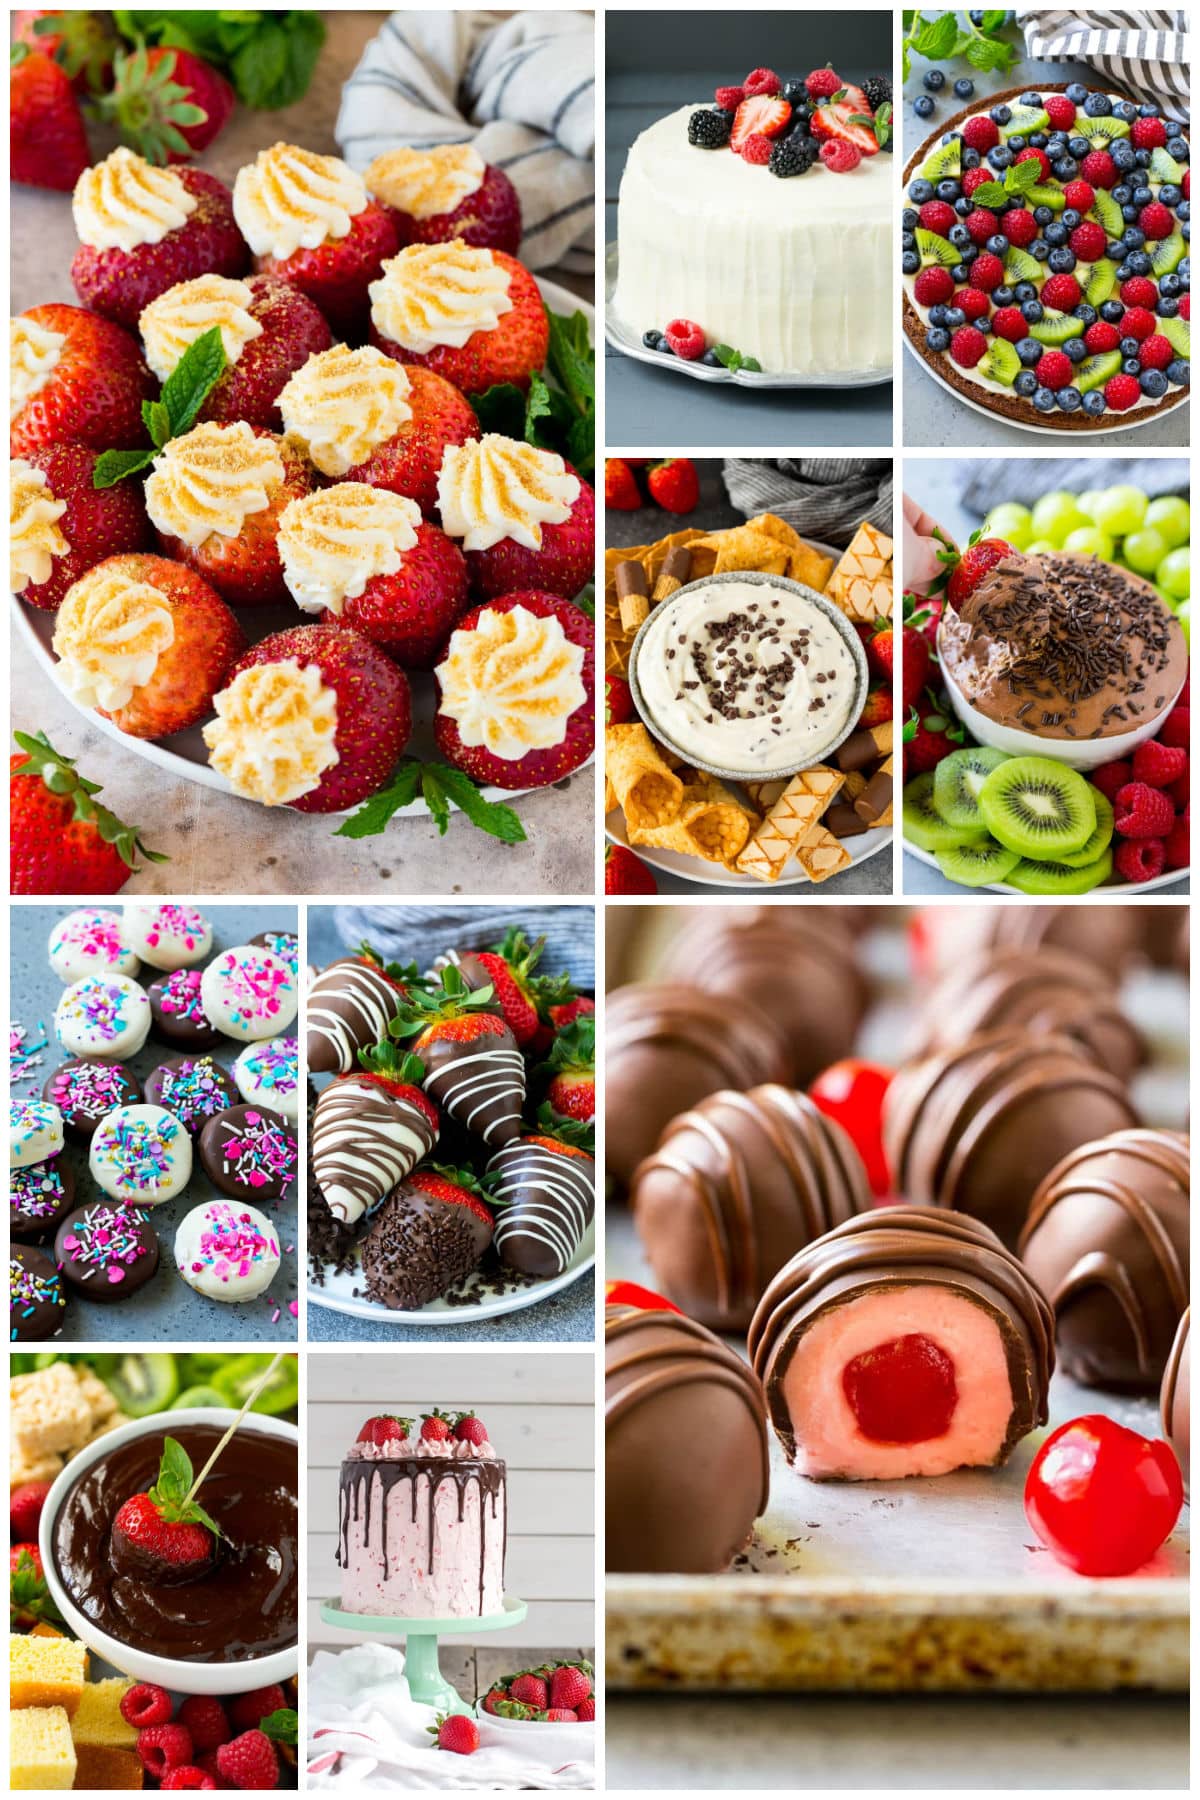 A collection of Valentine's Day dessert recipes including chocolate covered cherries, chocolate fruit dip and berry Chantilly cake.